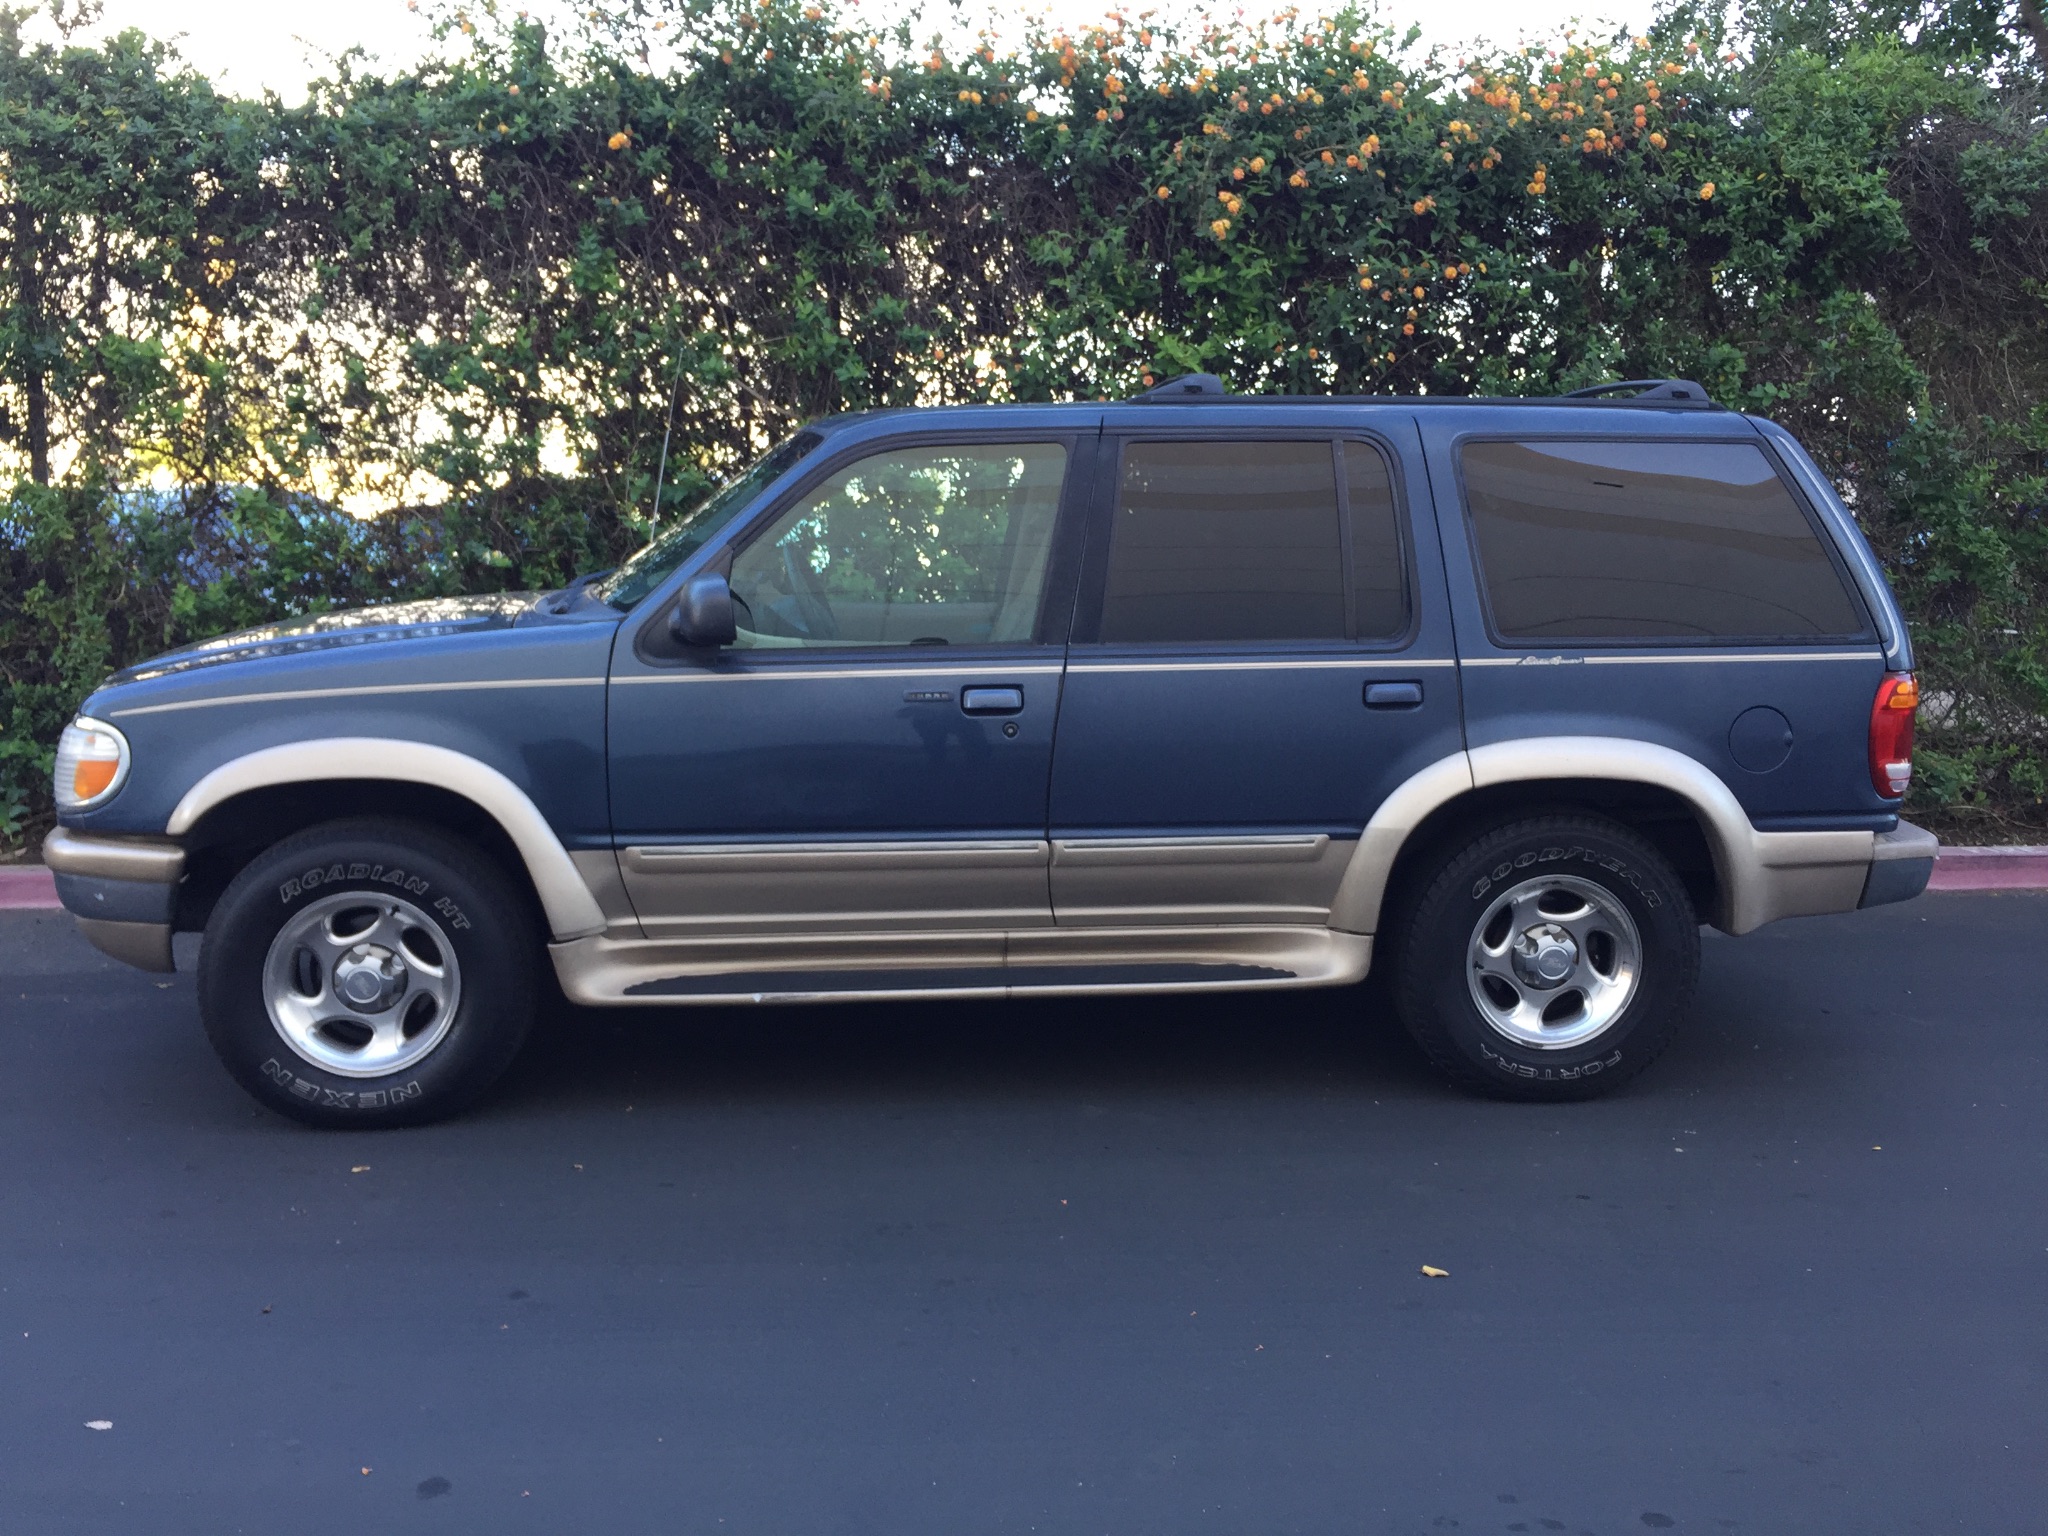 Used 1998 Ford Explorer XLT at City Cars Warehouse Inc